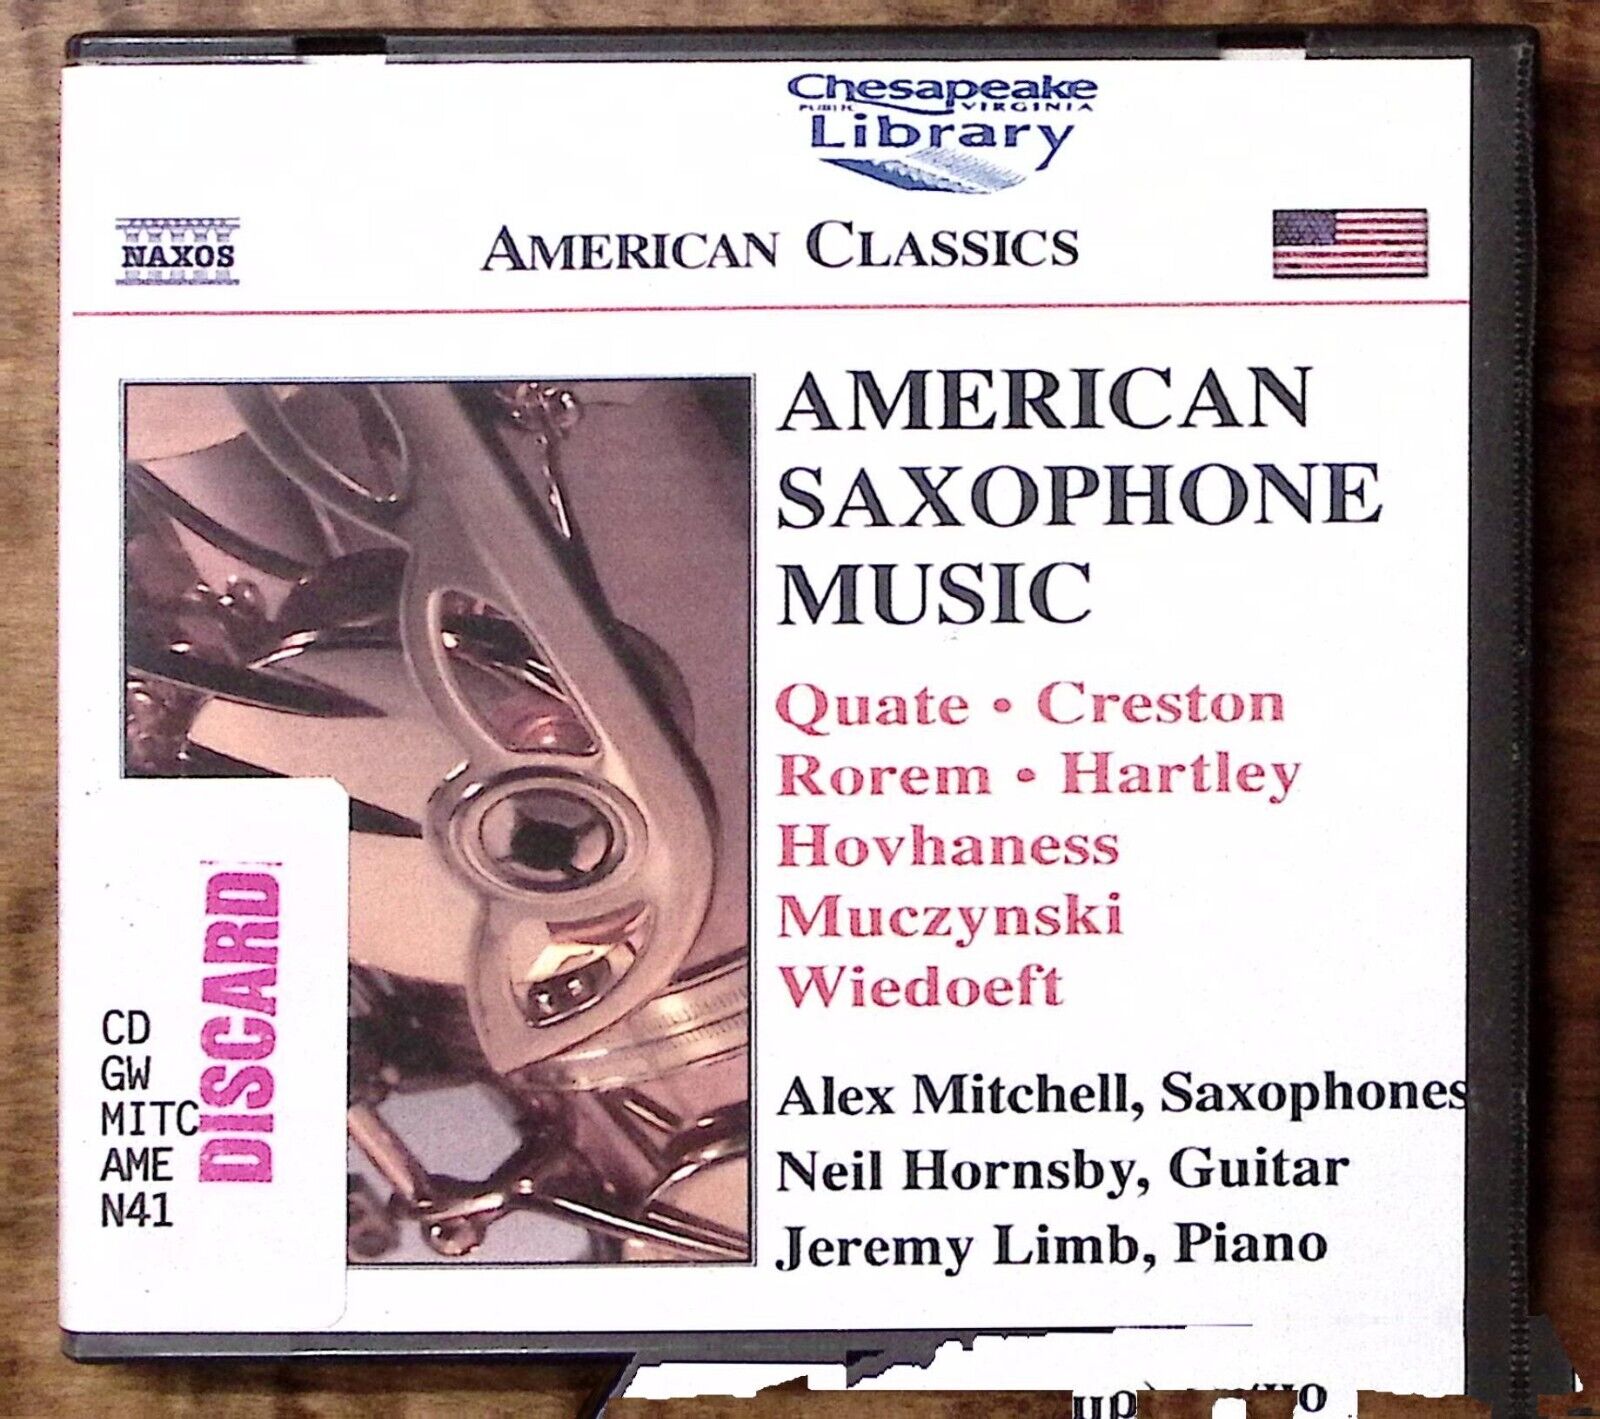 AMERICAN SAXOPHONE MUSIC ALEX MITCHELL NEIL HORNSBY CHESAPEAKE LIBRARY  CD 3033